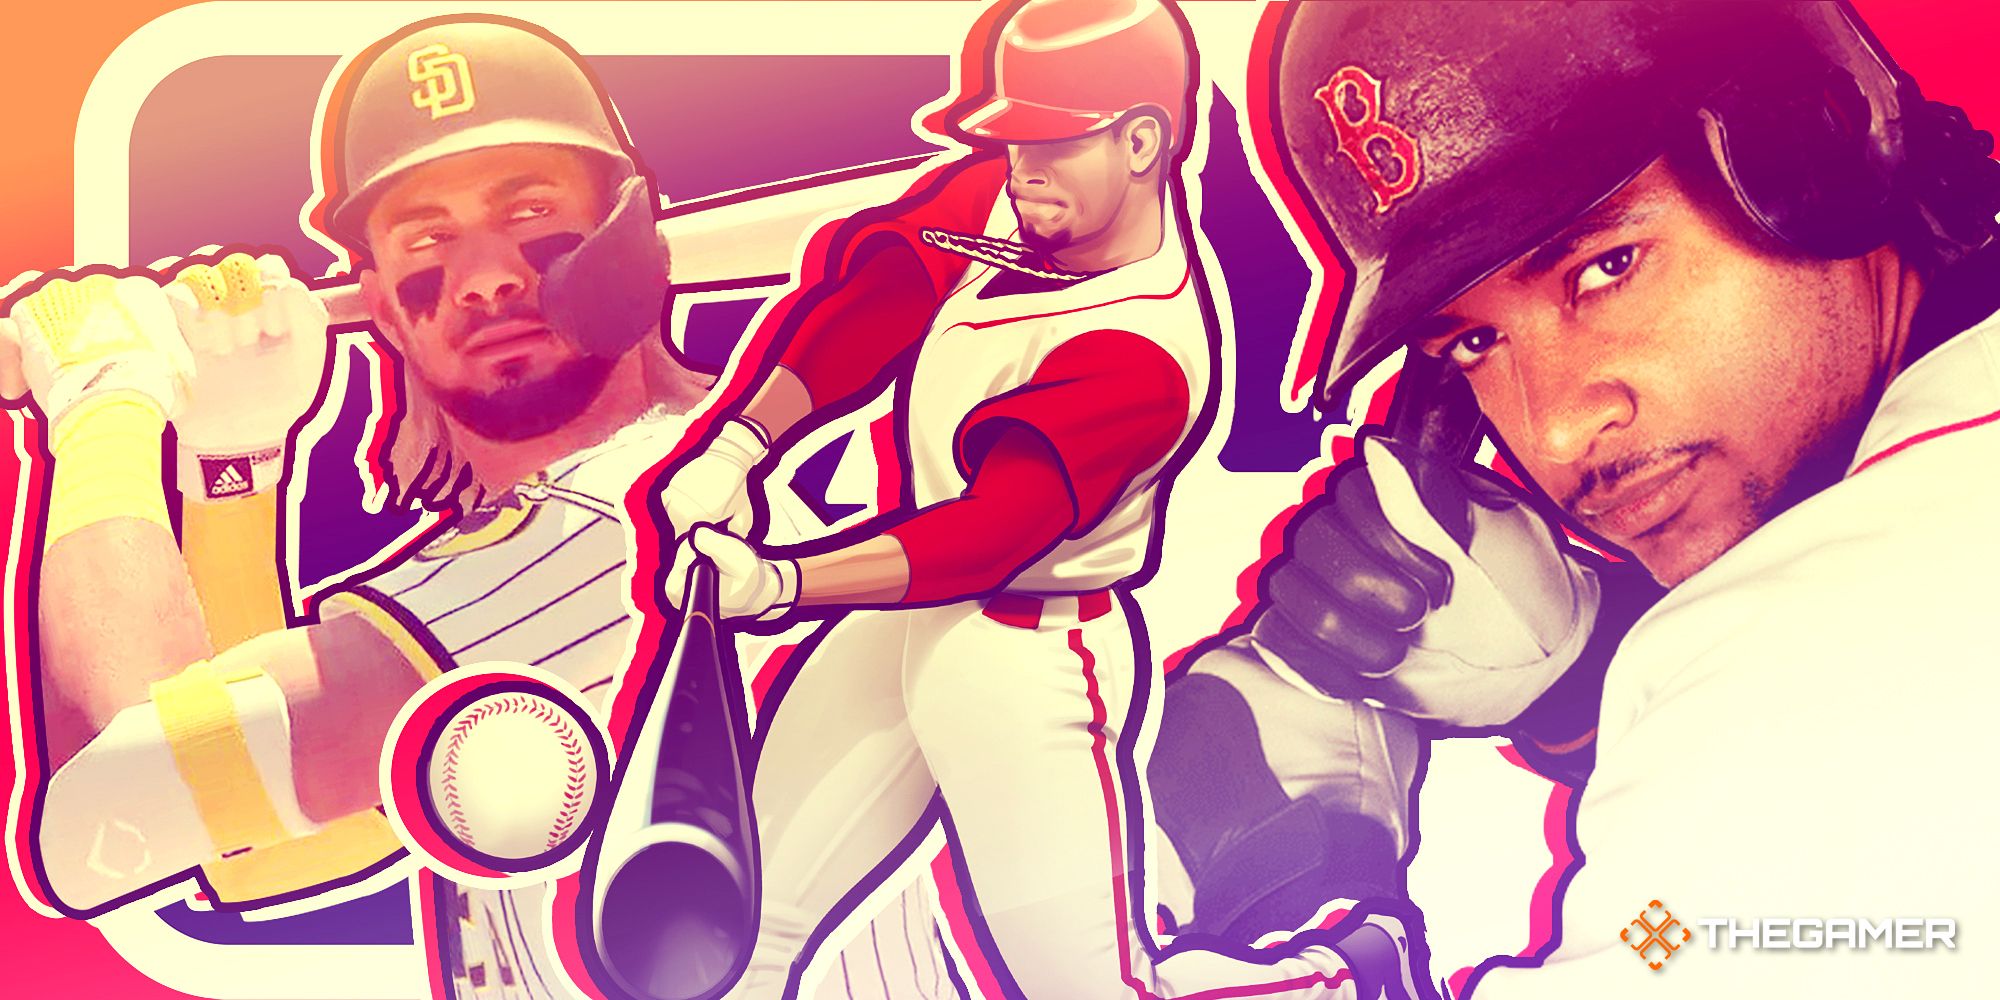 Images from various baseball video games